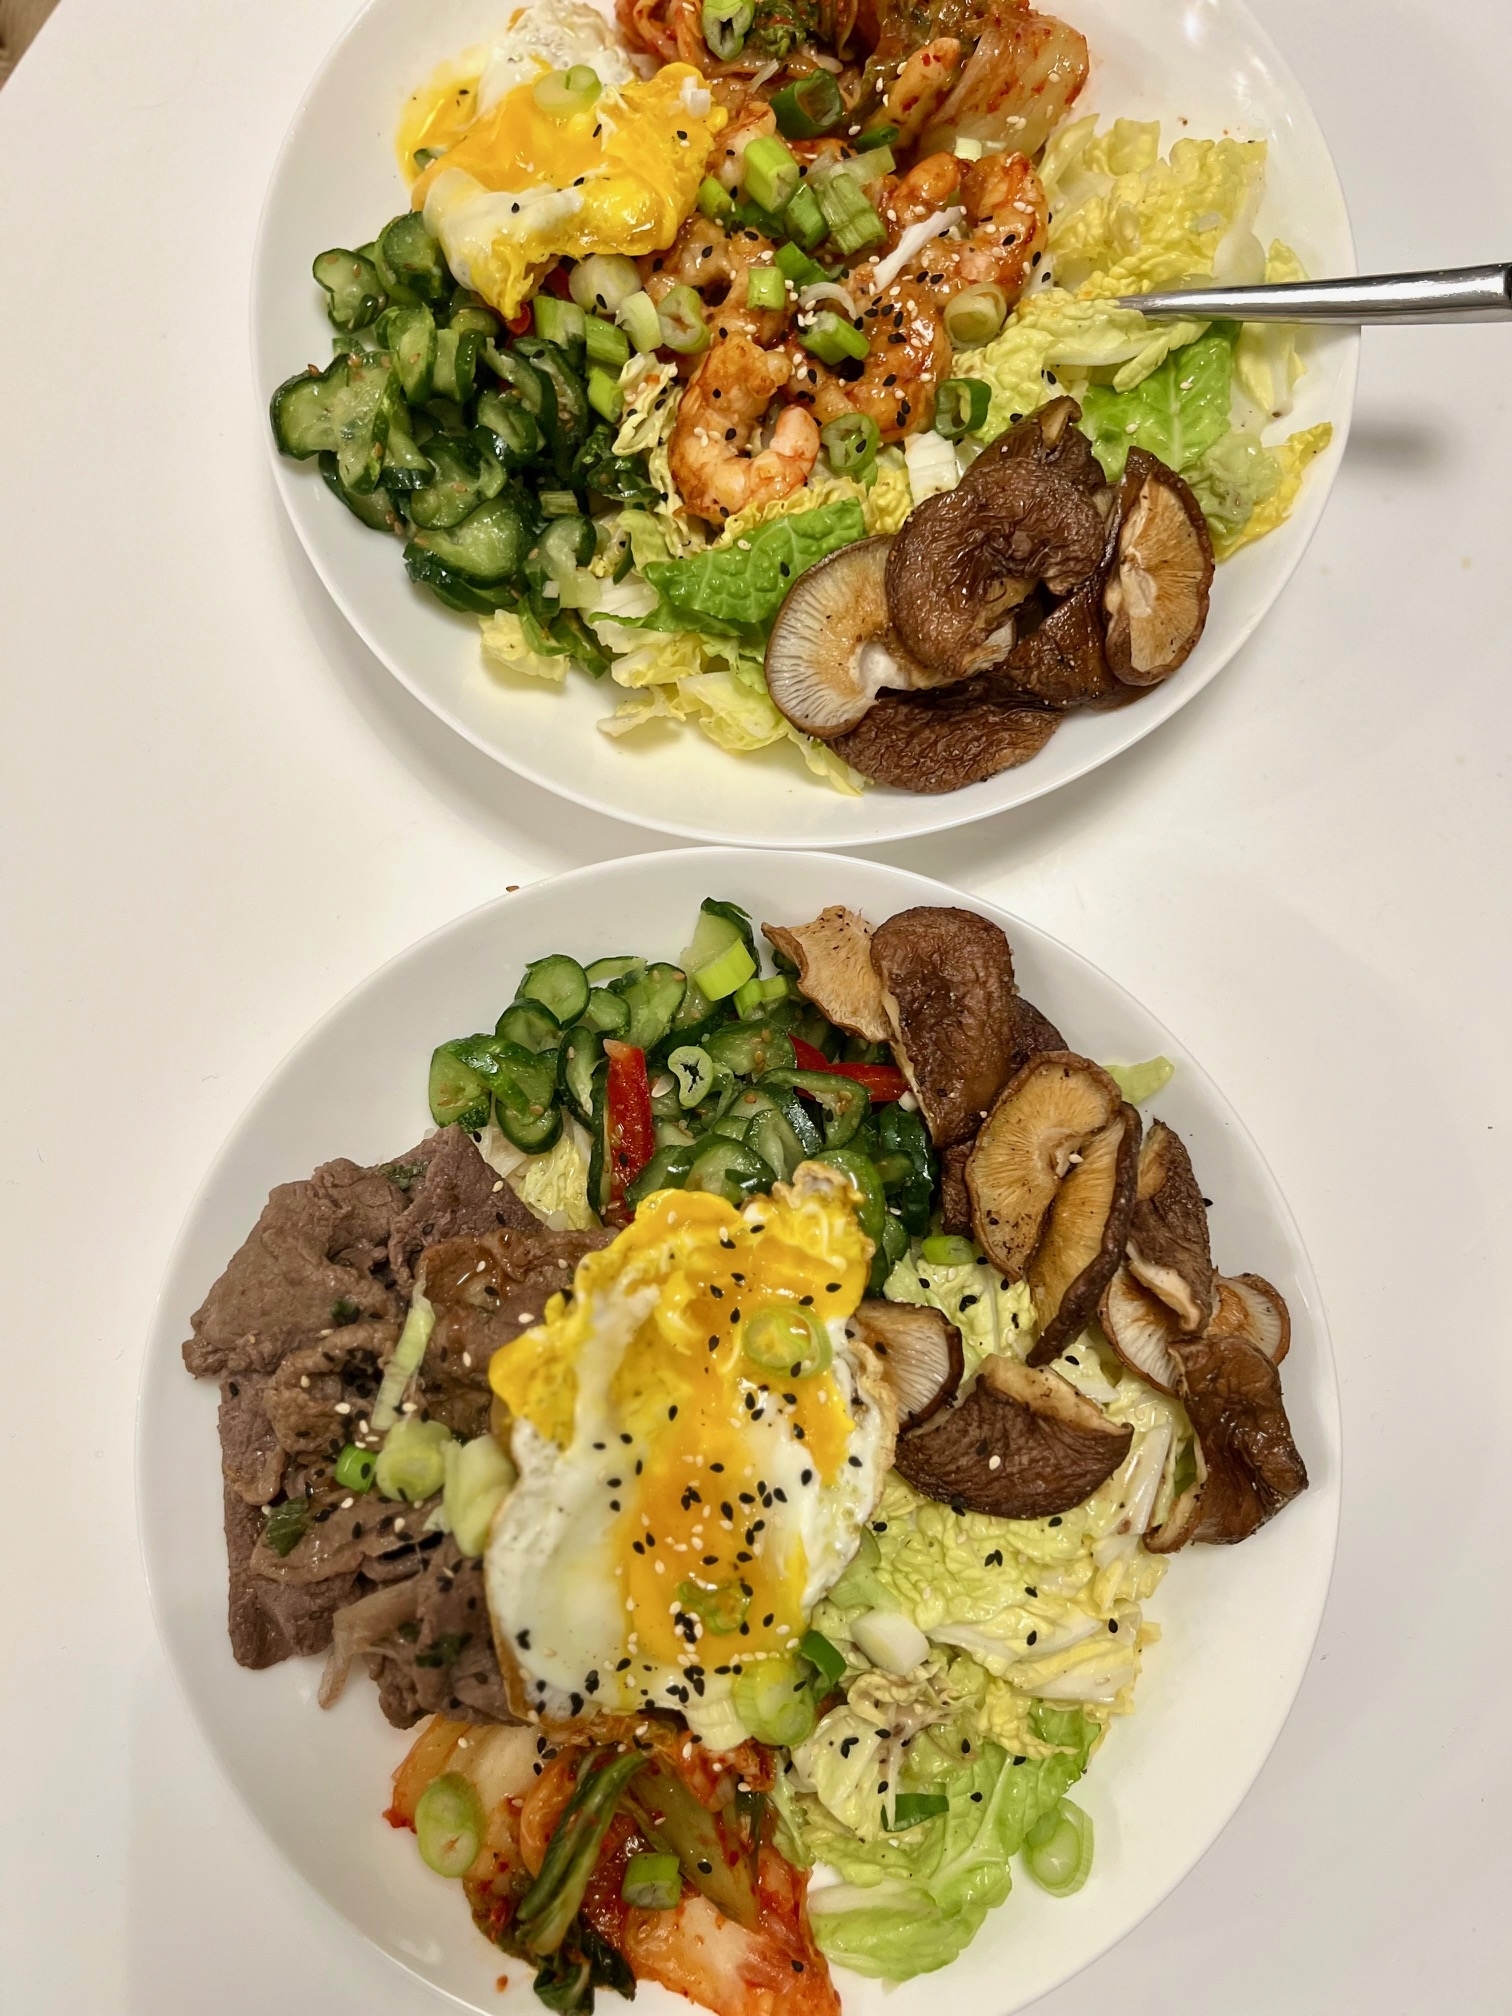 Two bowls of salad with assorted toppings including shrimp, beef, mushrooms, and a poached egg